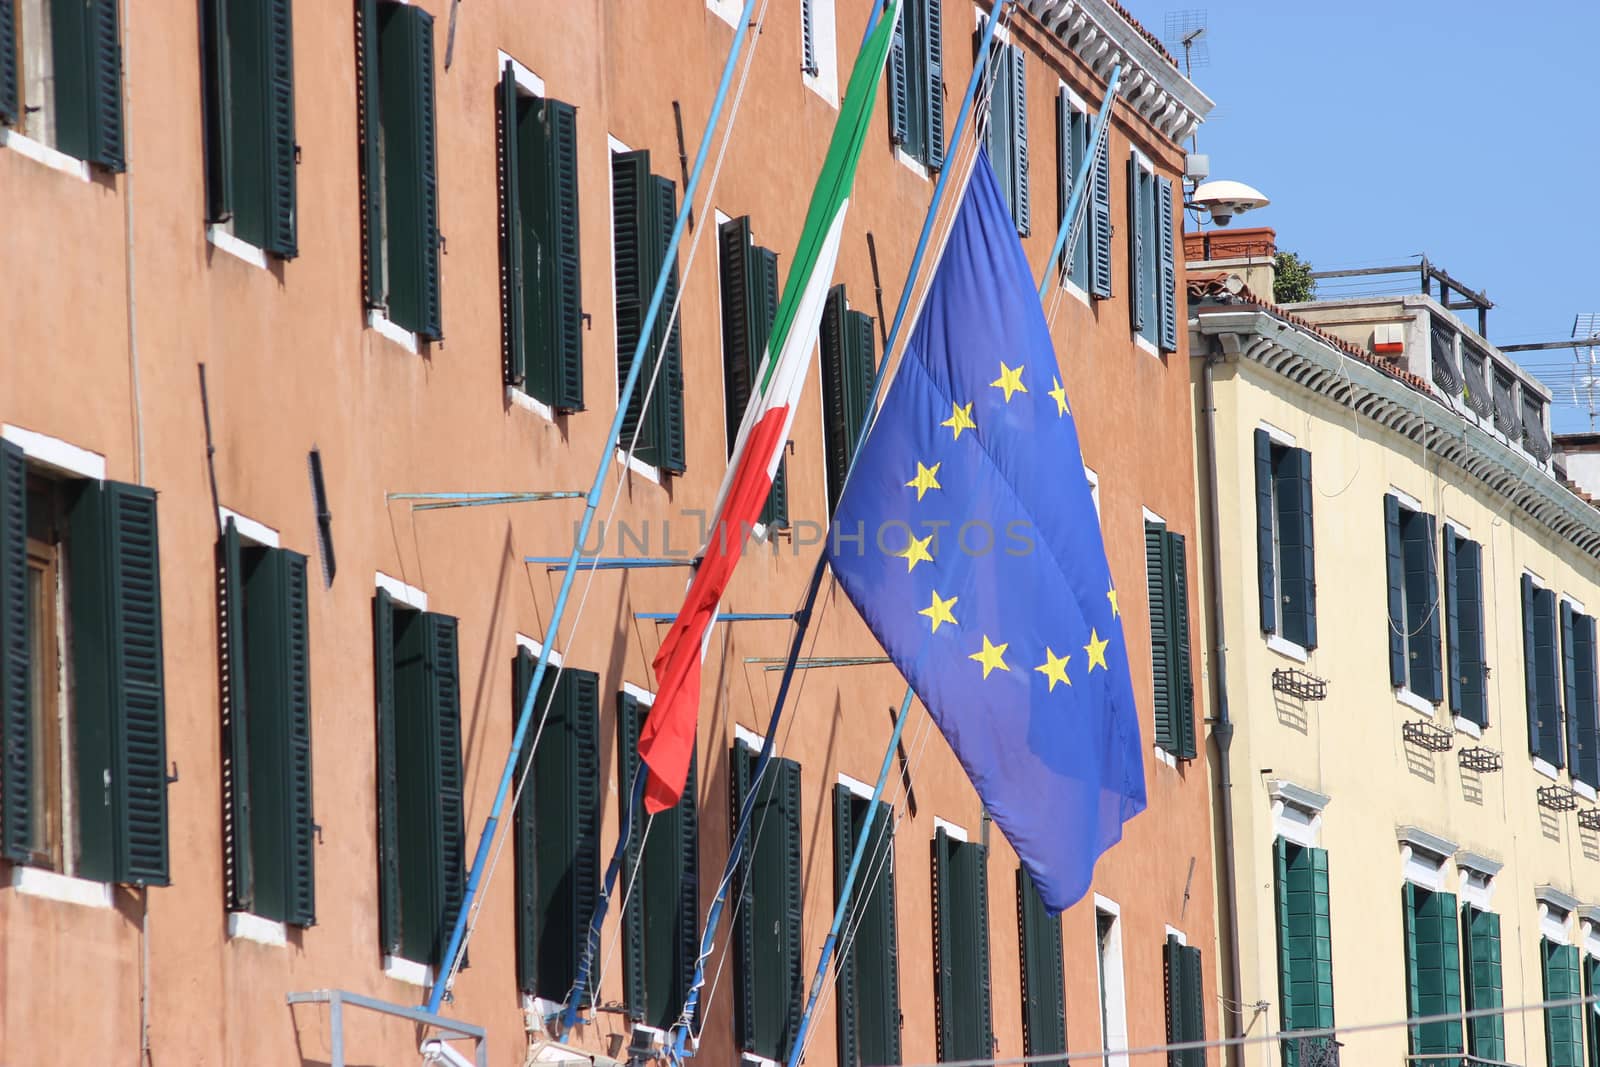 Italian and European flag on the wall of a building in Venice, Italy